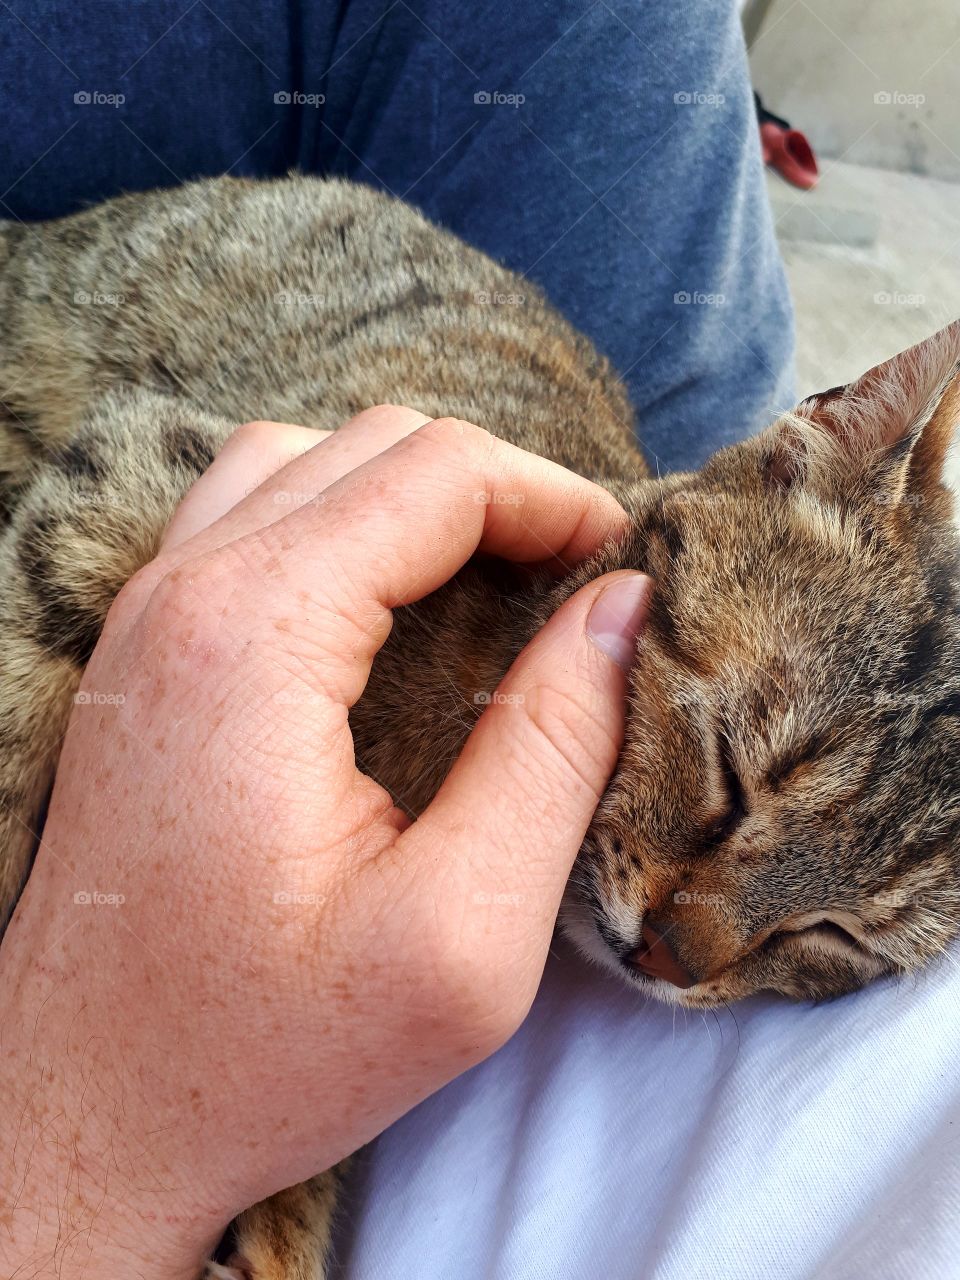 This is now my family cat.She still have no name, because it came a few days ago with us while we were working in the field.She is very dear.We thought it was our old cat because it was the same, but it did not.The likes of caressing and enjoying it